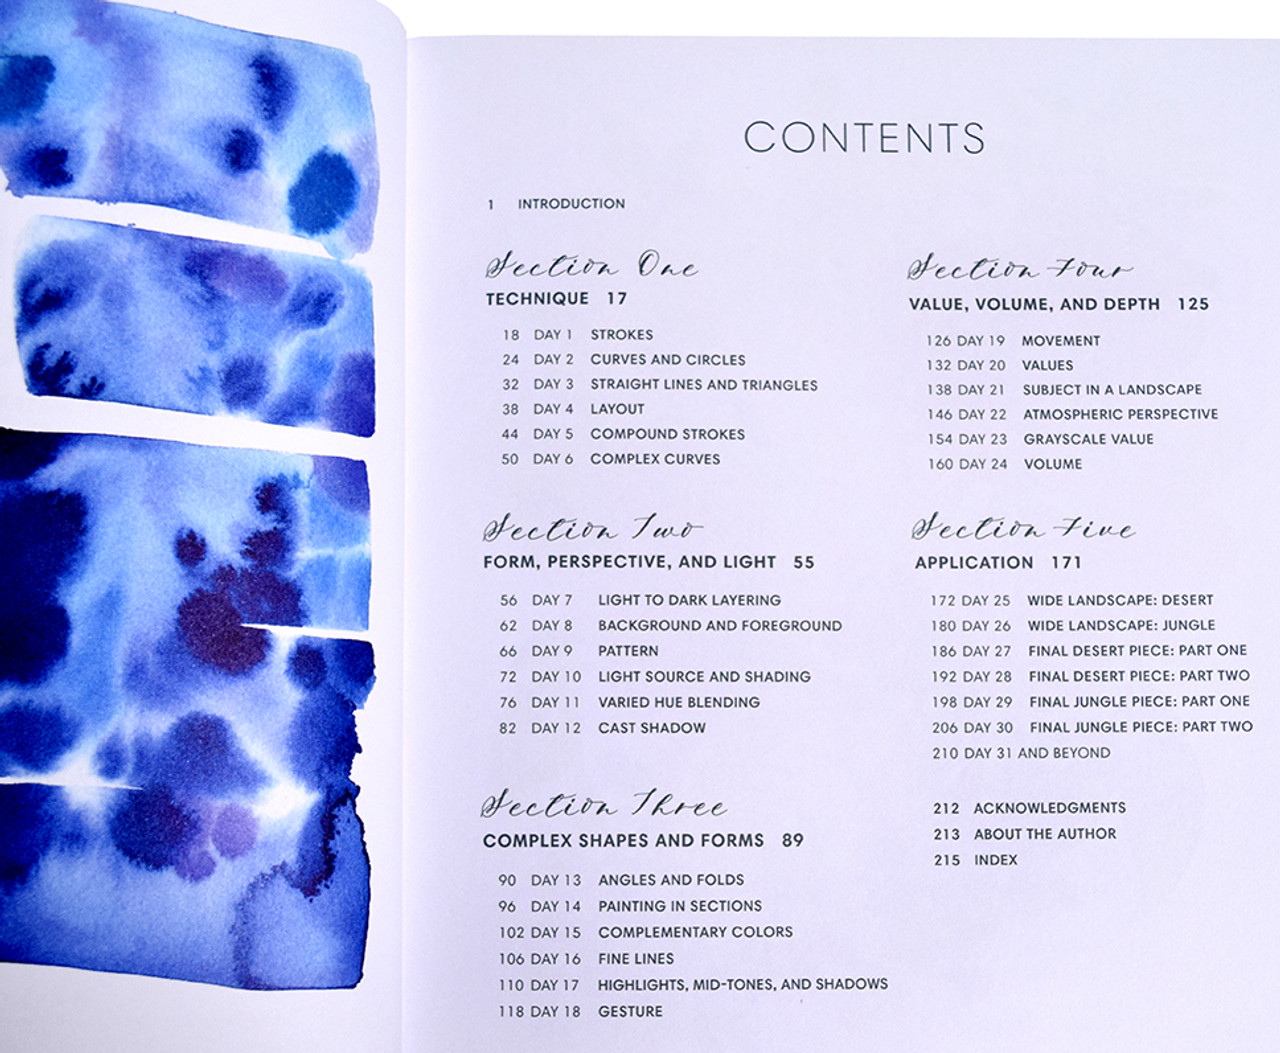 Everyday Watercolor: Learn to Paint Watercolor in 30 Days by Jenna Rainey